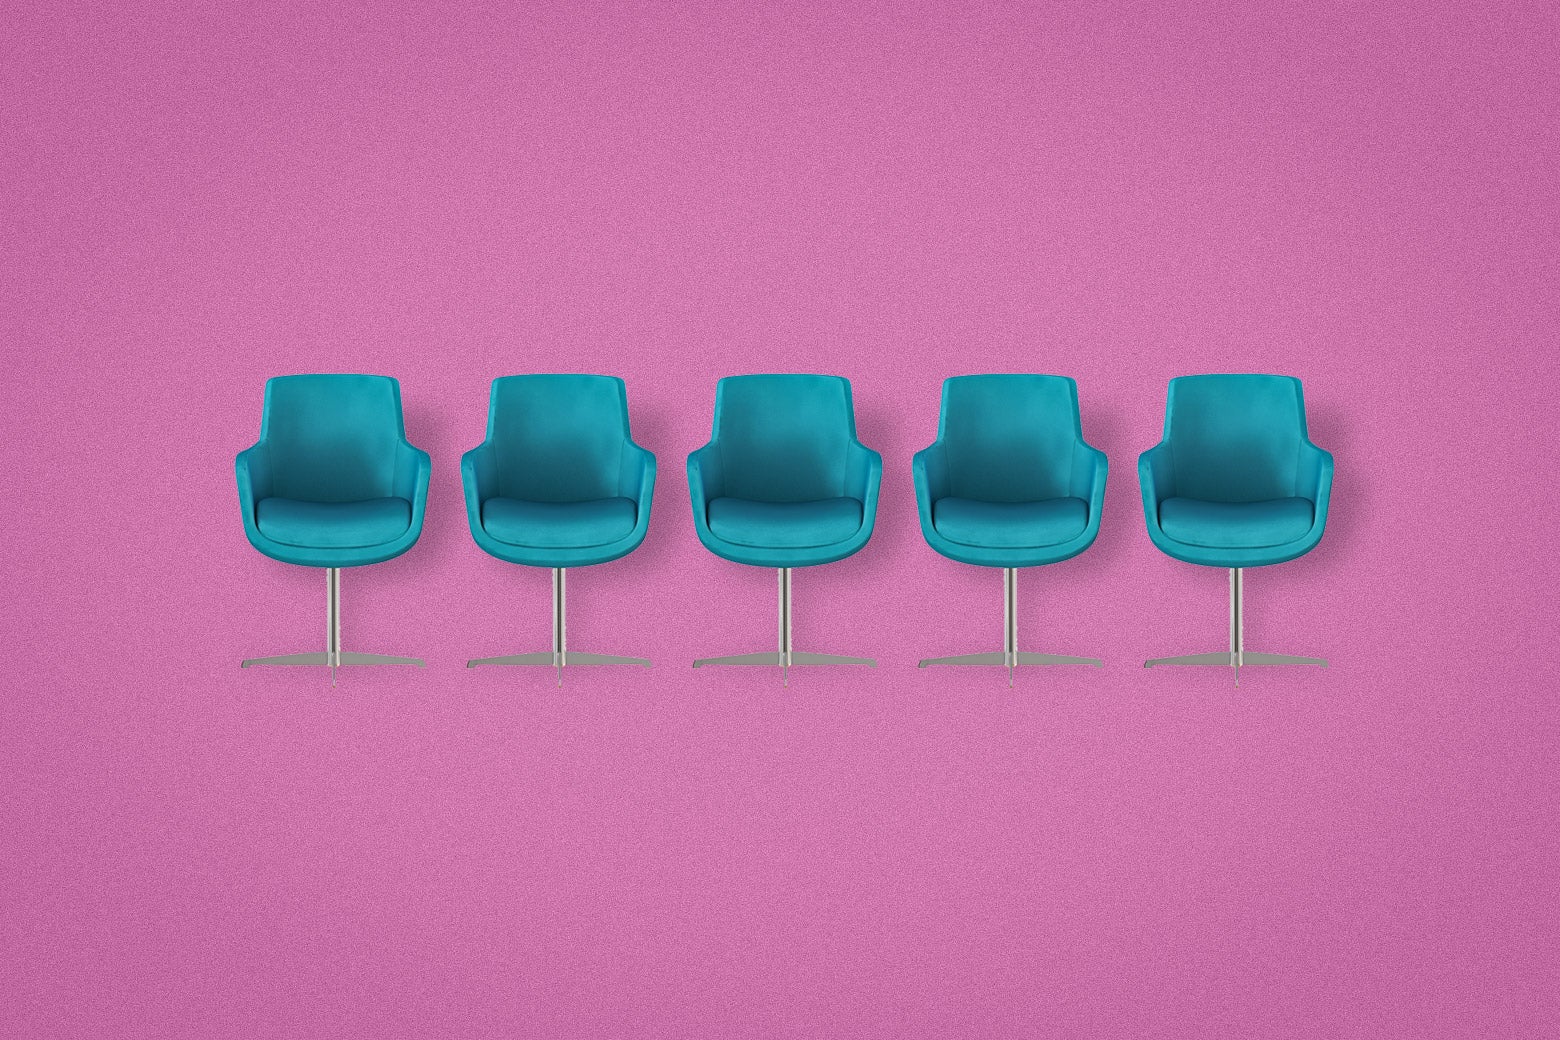 A row of green chairs against a pink background.